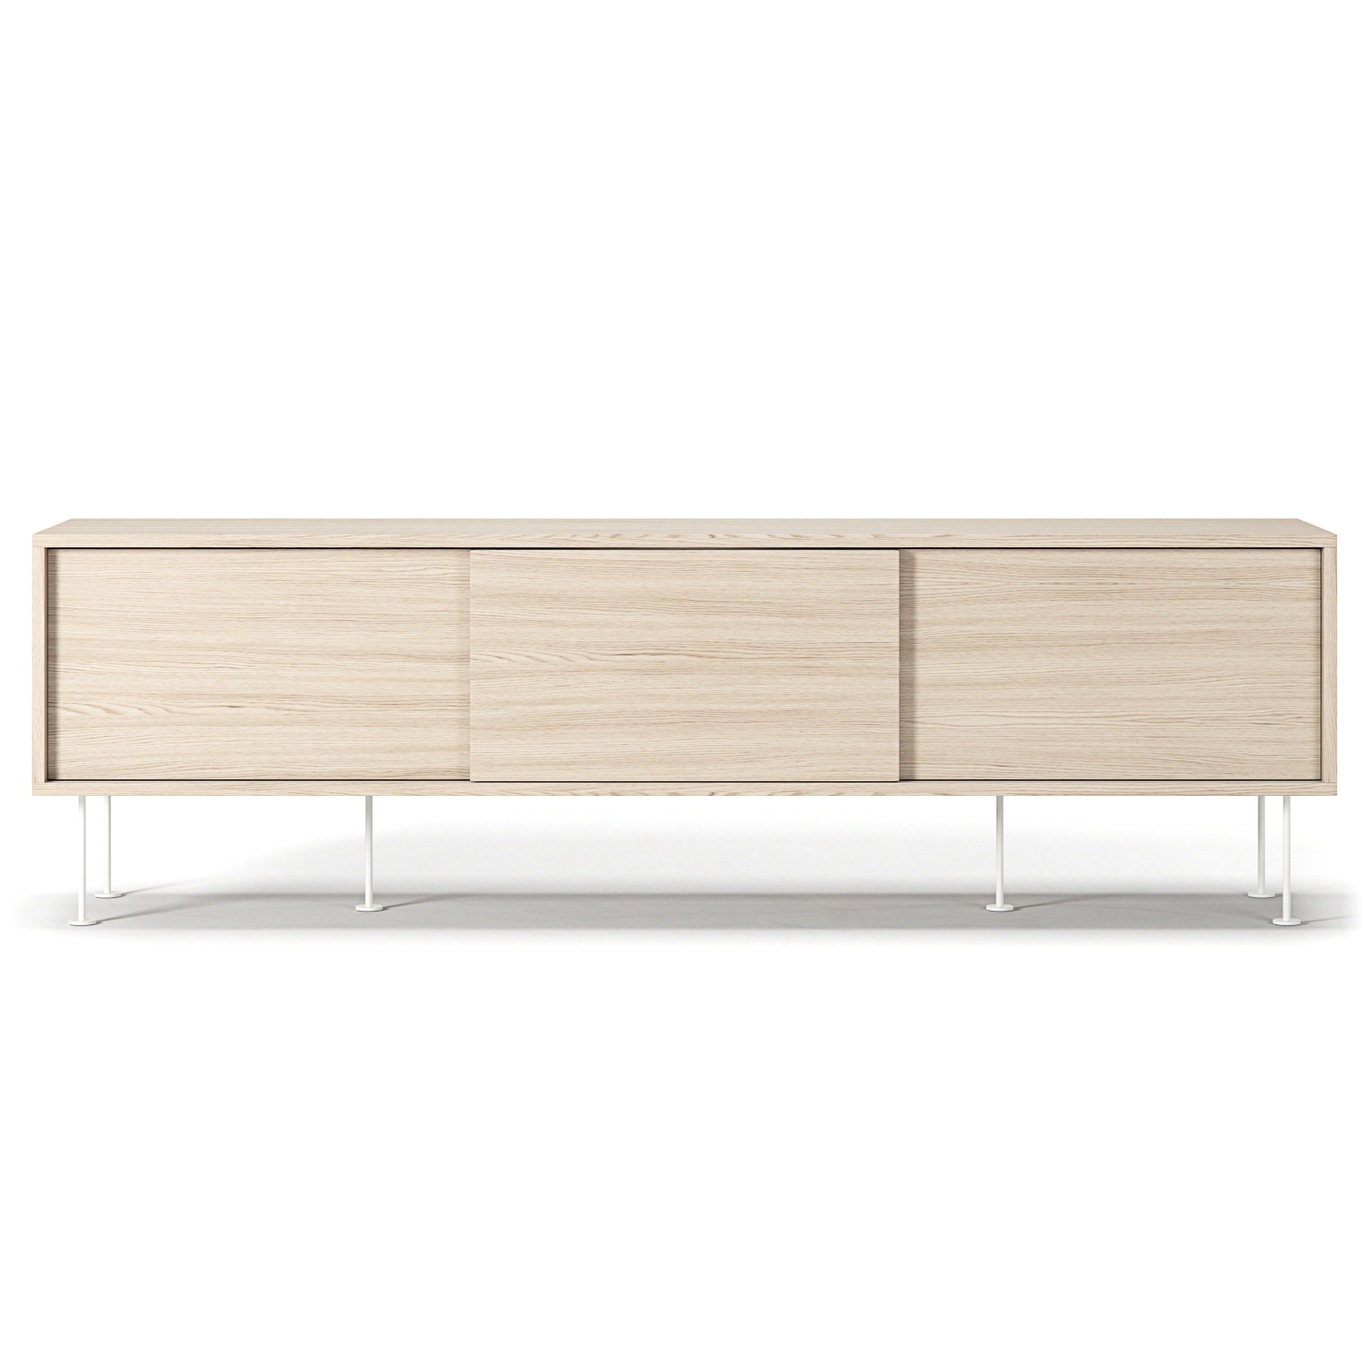 Vogue Media Bench With Legs 180 cm, White Pigmented Oak / White